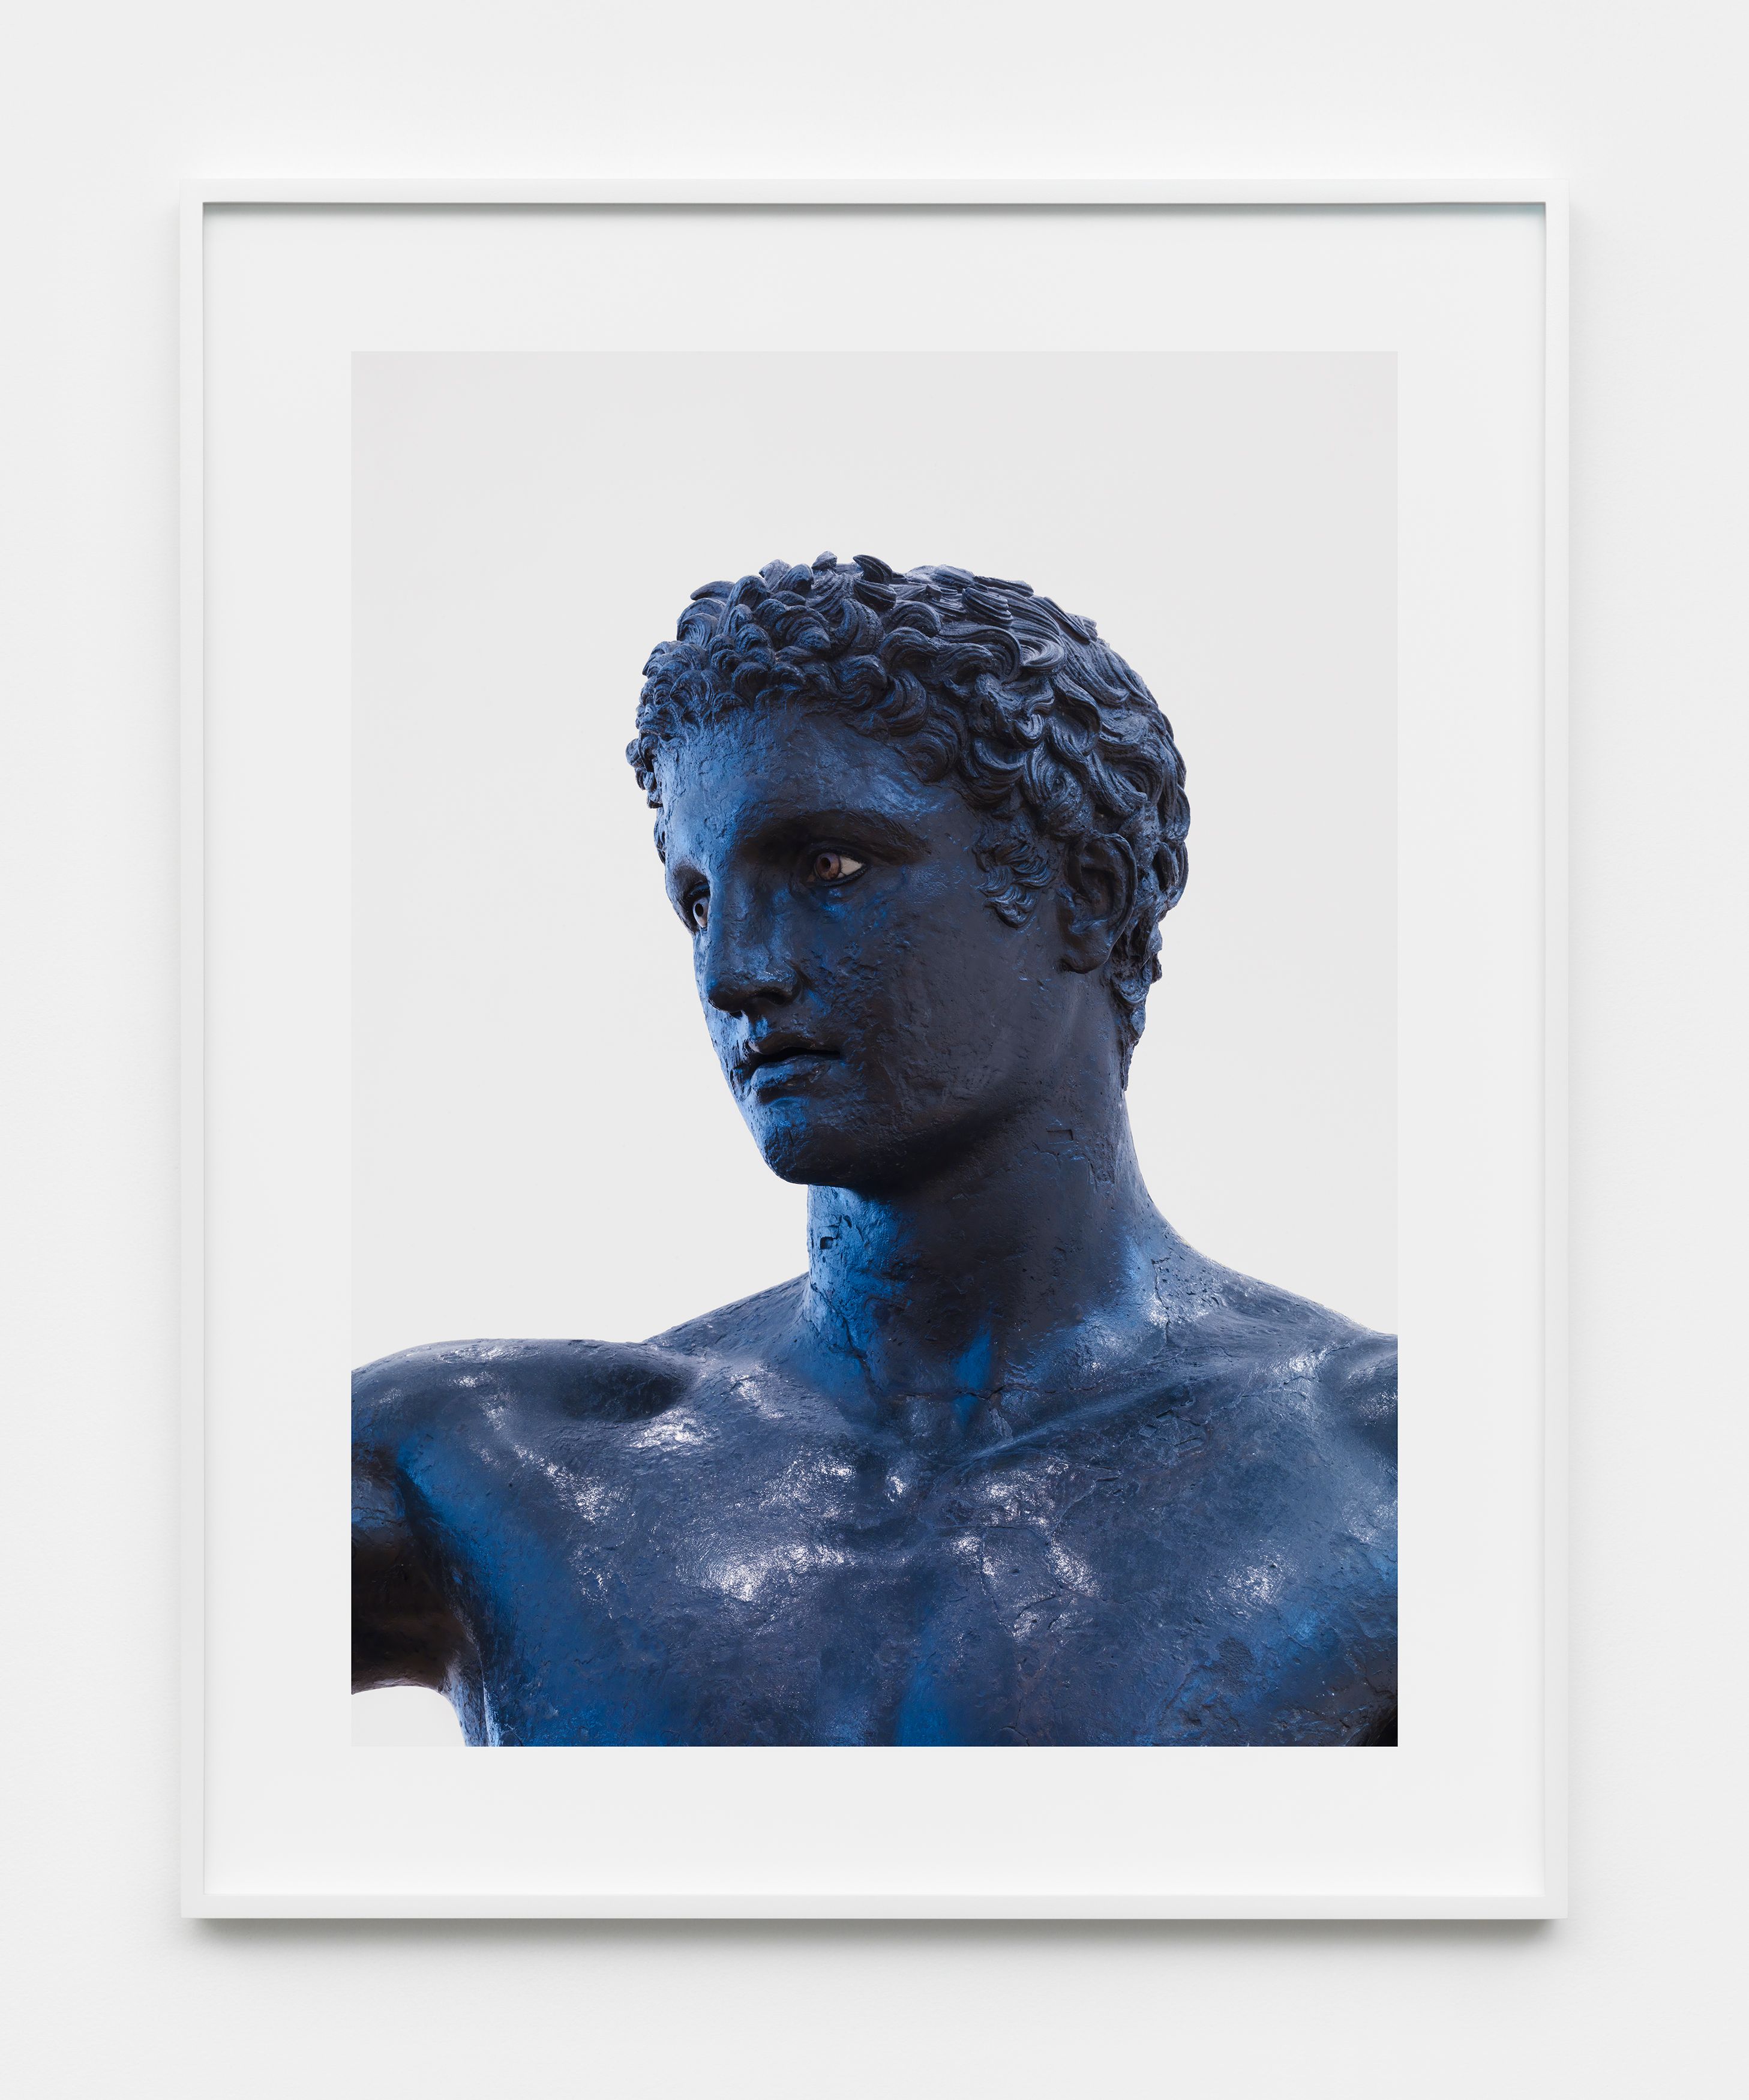 Matthew Booth, Ephebe, 2014-2018, mounted inkjet print in powder-coated aluminum frame, 30 x 24 x 1 1/2 in. (76.2 x 60.96 cm) (framed size) 